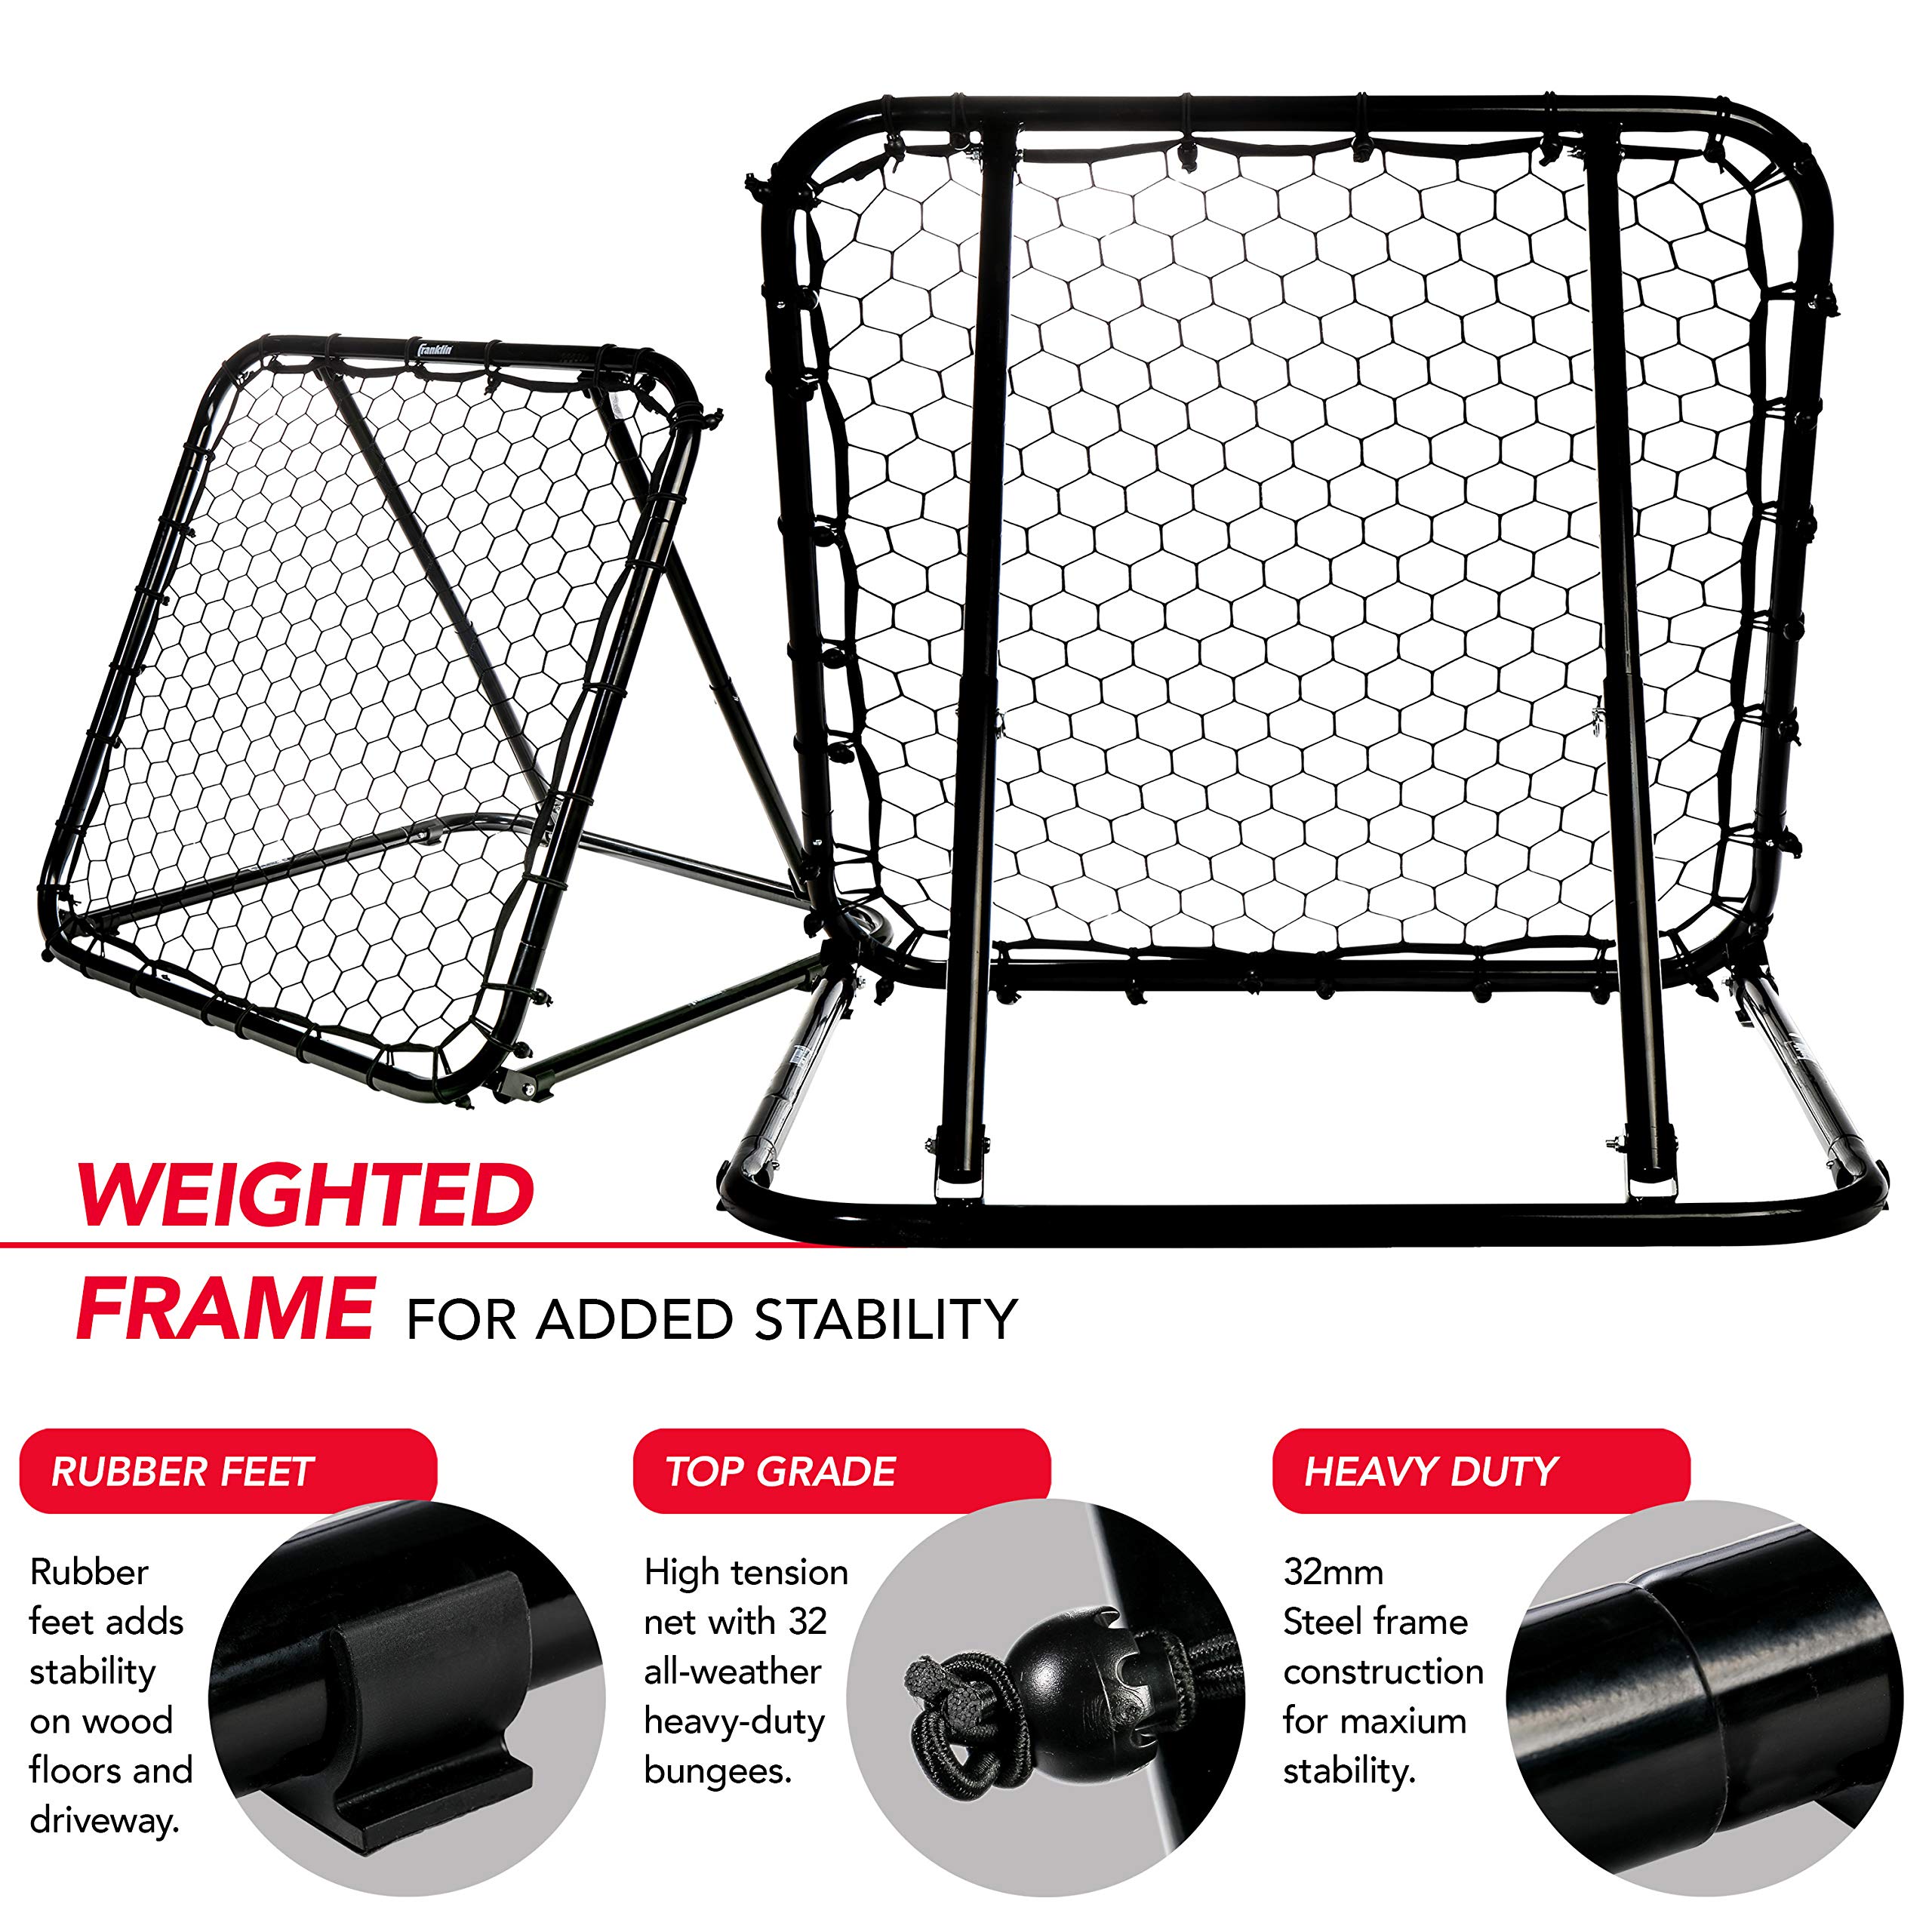 Franklin Sports Basketball Pass Back Rebounder Net - Multi-Sport Training Rebound Screen - Perfect for Passing and Shooting Practice - 3' x 3', Black (92499X)